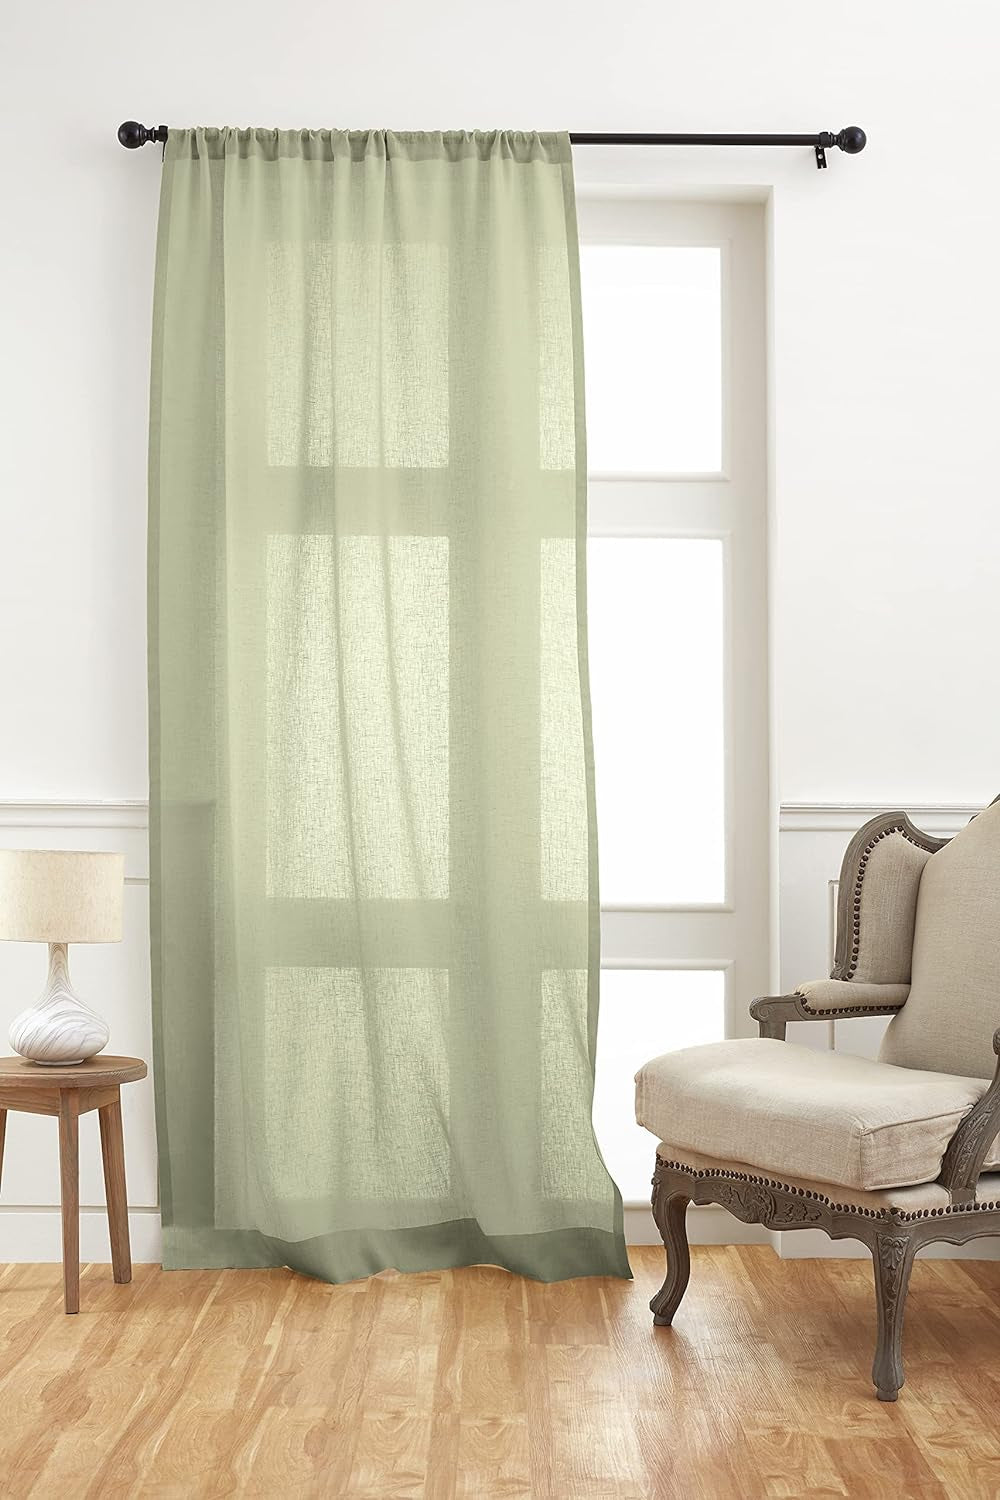 Solino Home Linen Sheer Curtain – 52 X 45 Inch Light Natural Rod Pocket Window Panel – 100% Pure Natural Fabric Curtain for Living Room, Indoor, Outdoor – Handcrafted from European Flax  Solino Home Sage Green 52 X 63 Inch 